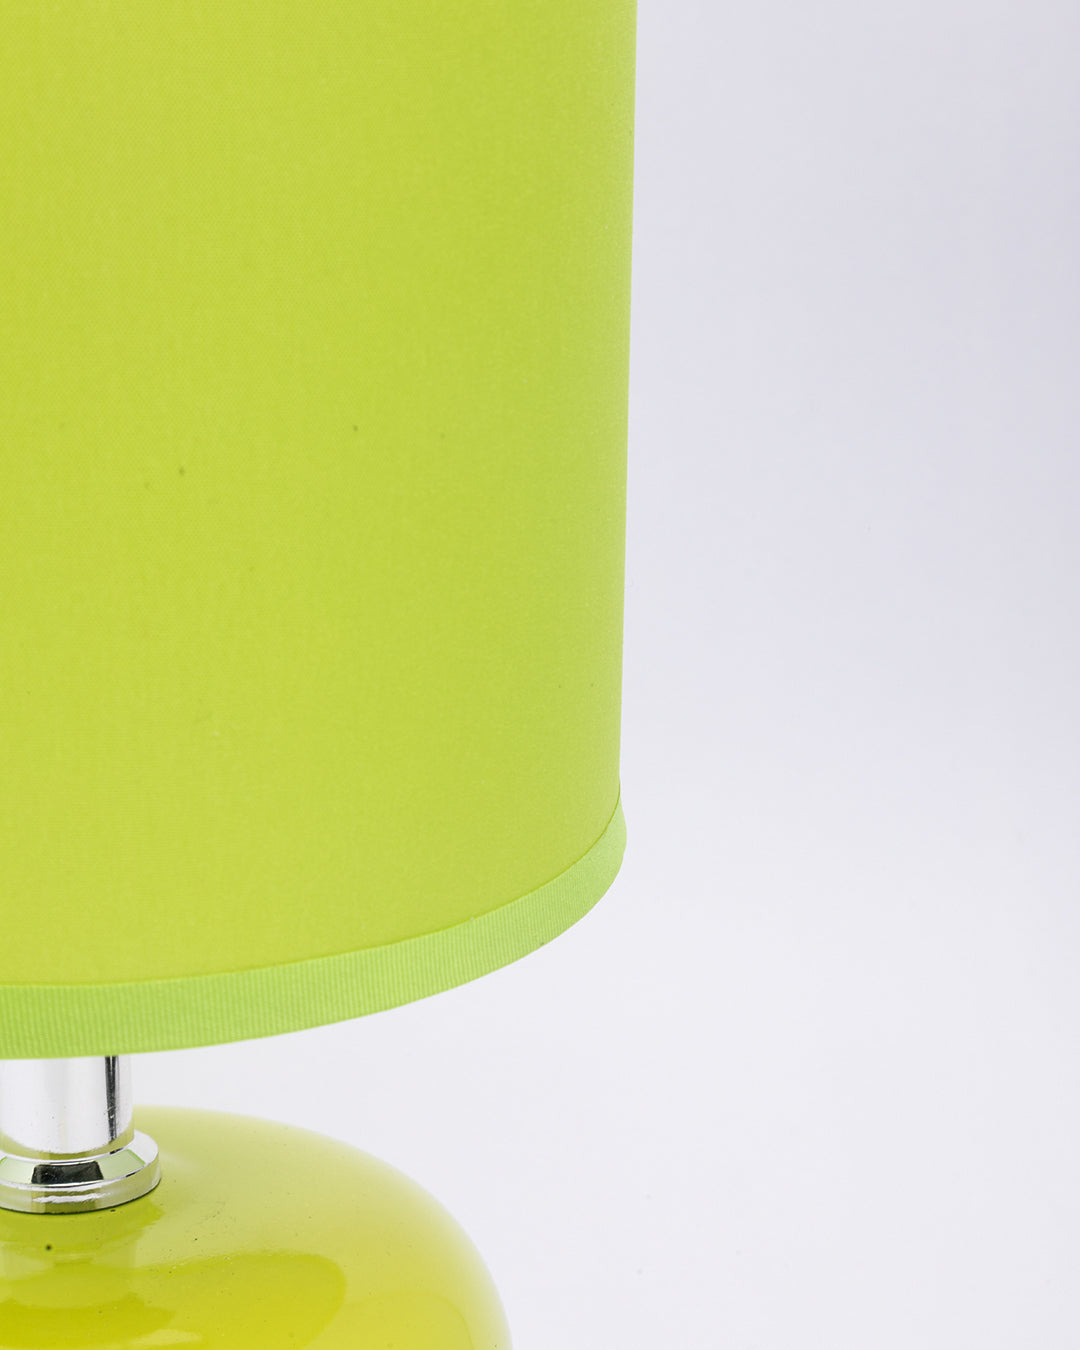 VON CASA Table Lamp, with Shade, Oval Shape, Green, Ceramic